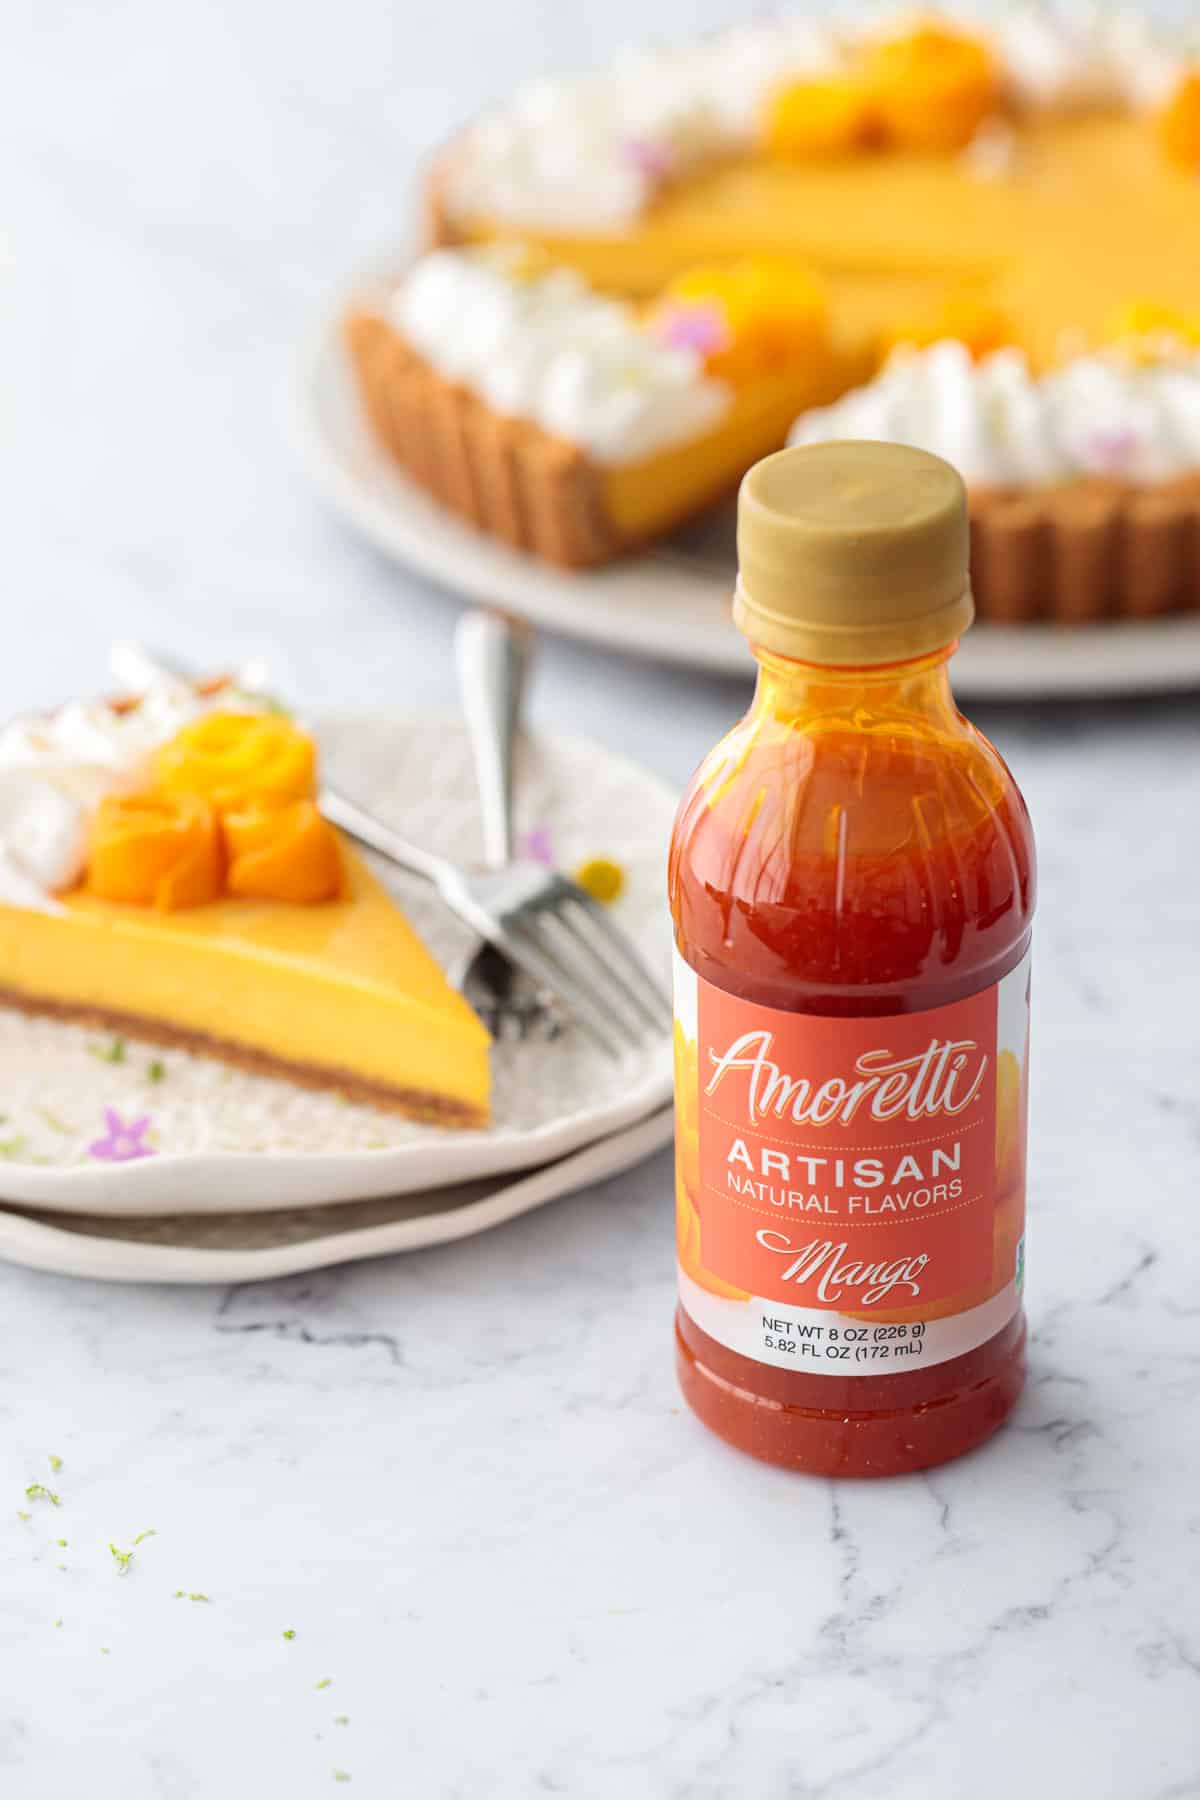 Bottle of Amoretti Natural Artisan Mango Flavor with a slice of Mango Lime Tart on a plate and the full tart out of focus in the background.